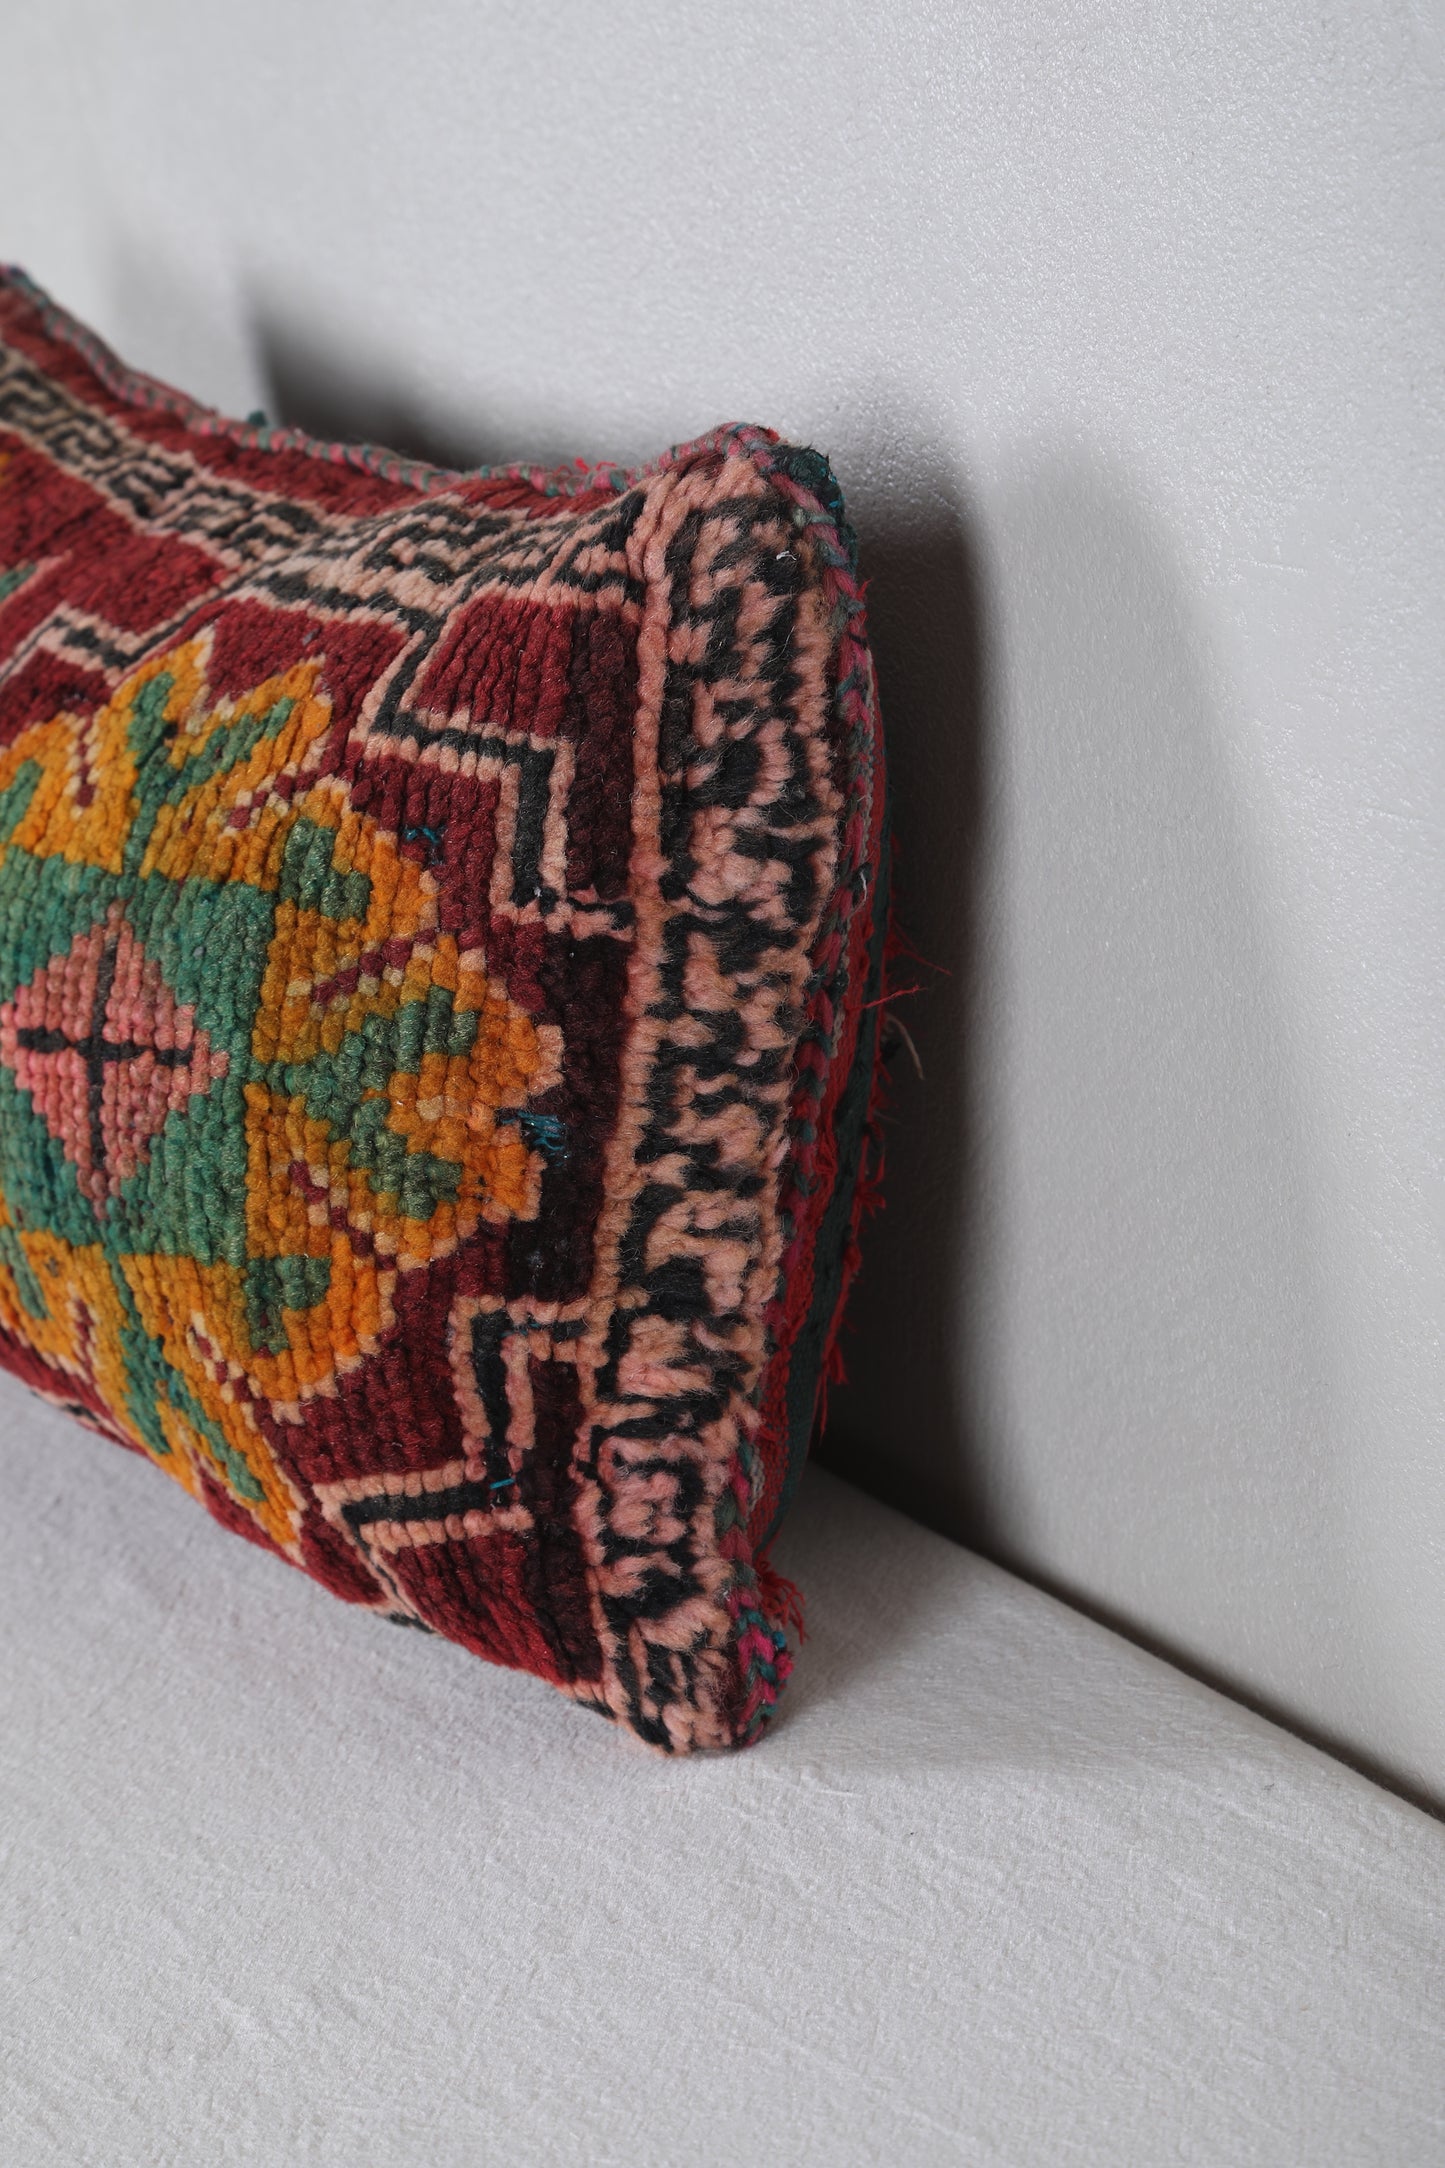 Moroccan tribal Pillow 12.9 INCHES X 20 INCHES